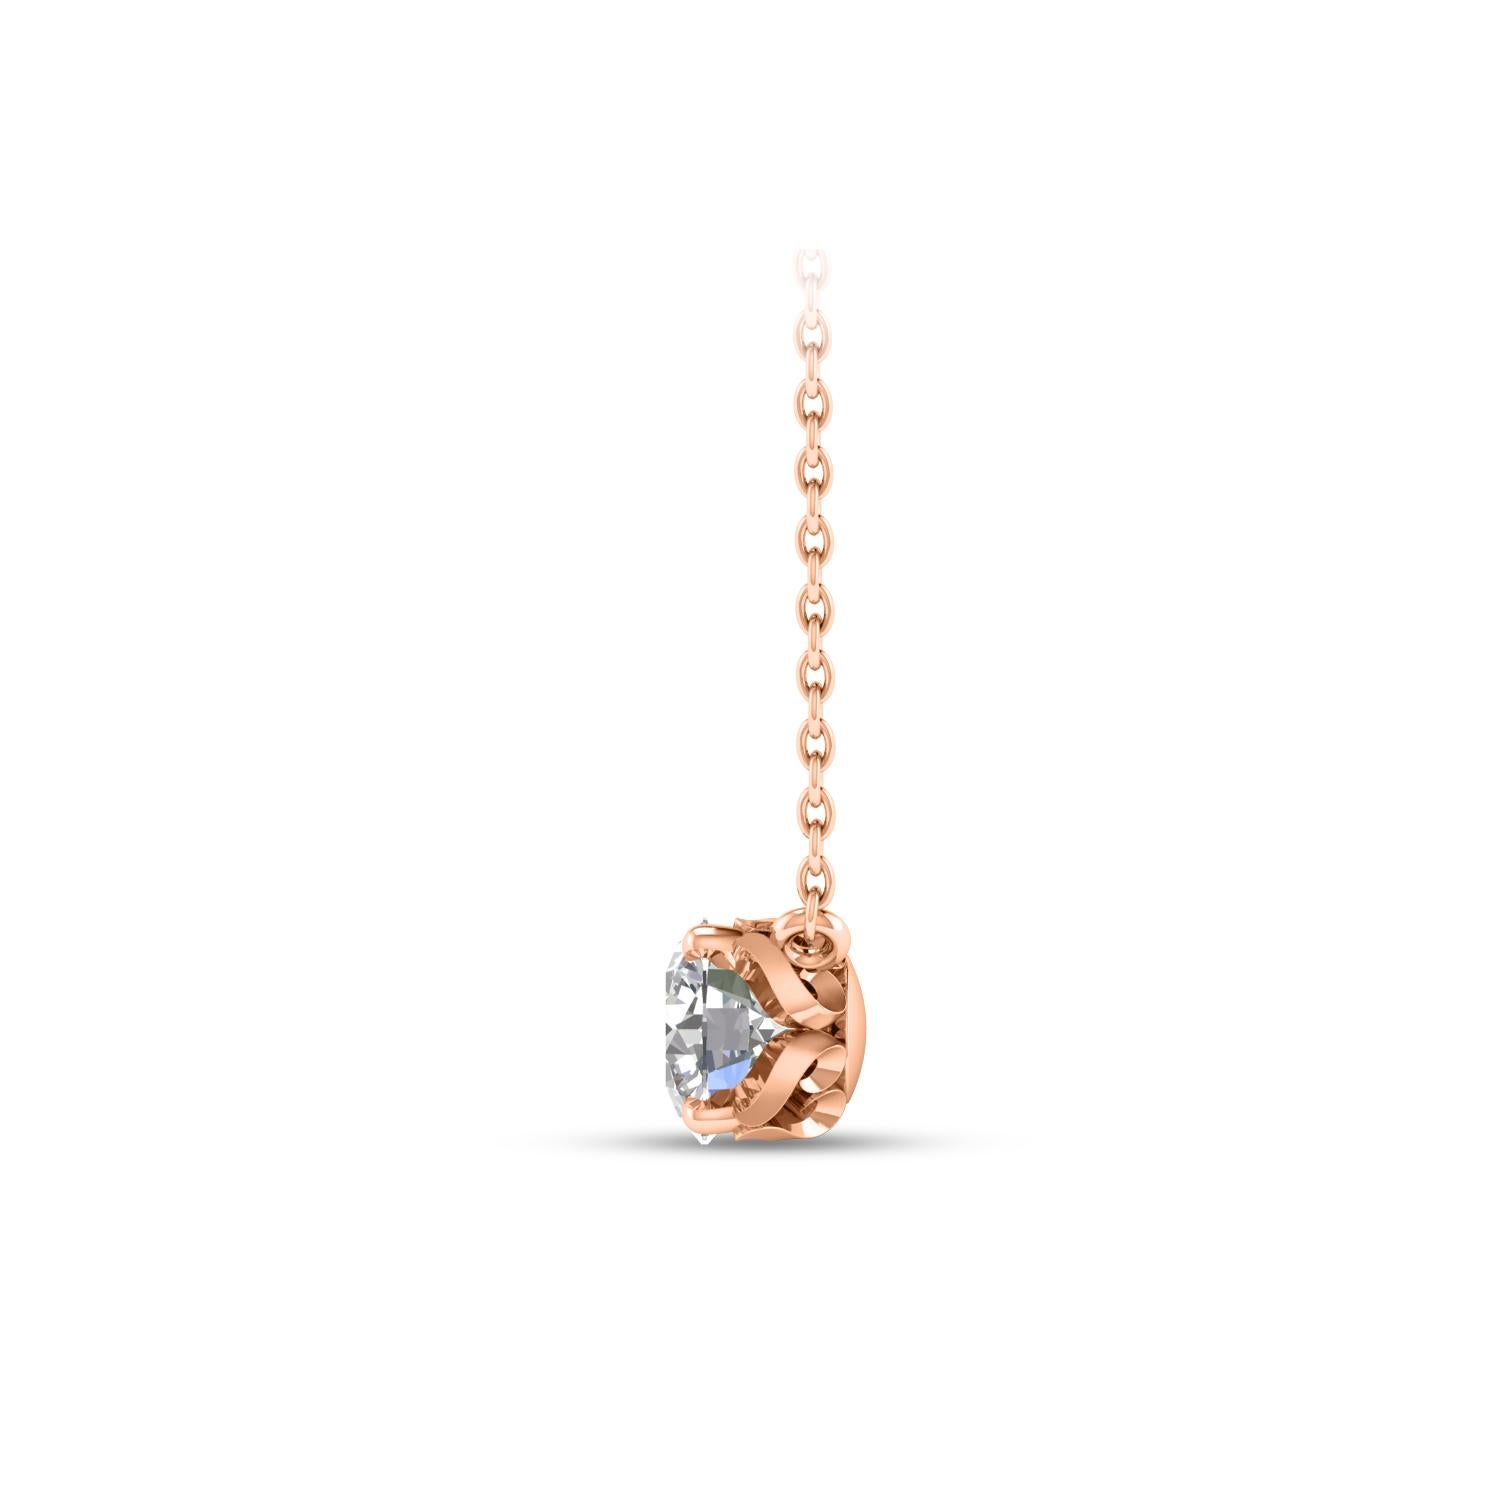 Contemporary Harakh GIA Certified 0.28 Carat Solitaire Diamond Pendant Necklace in 18 KT Gold For Sale